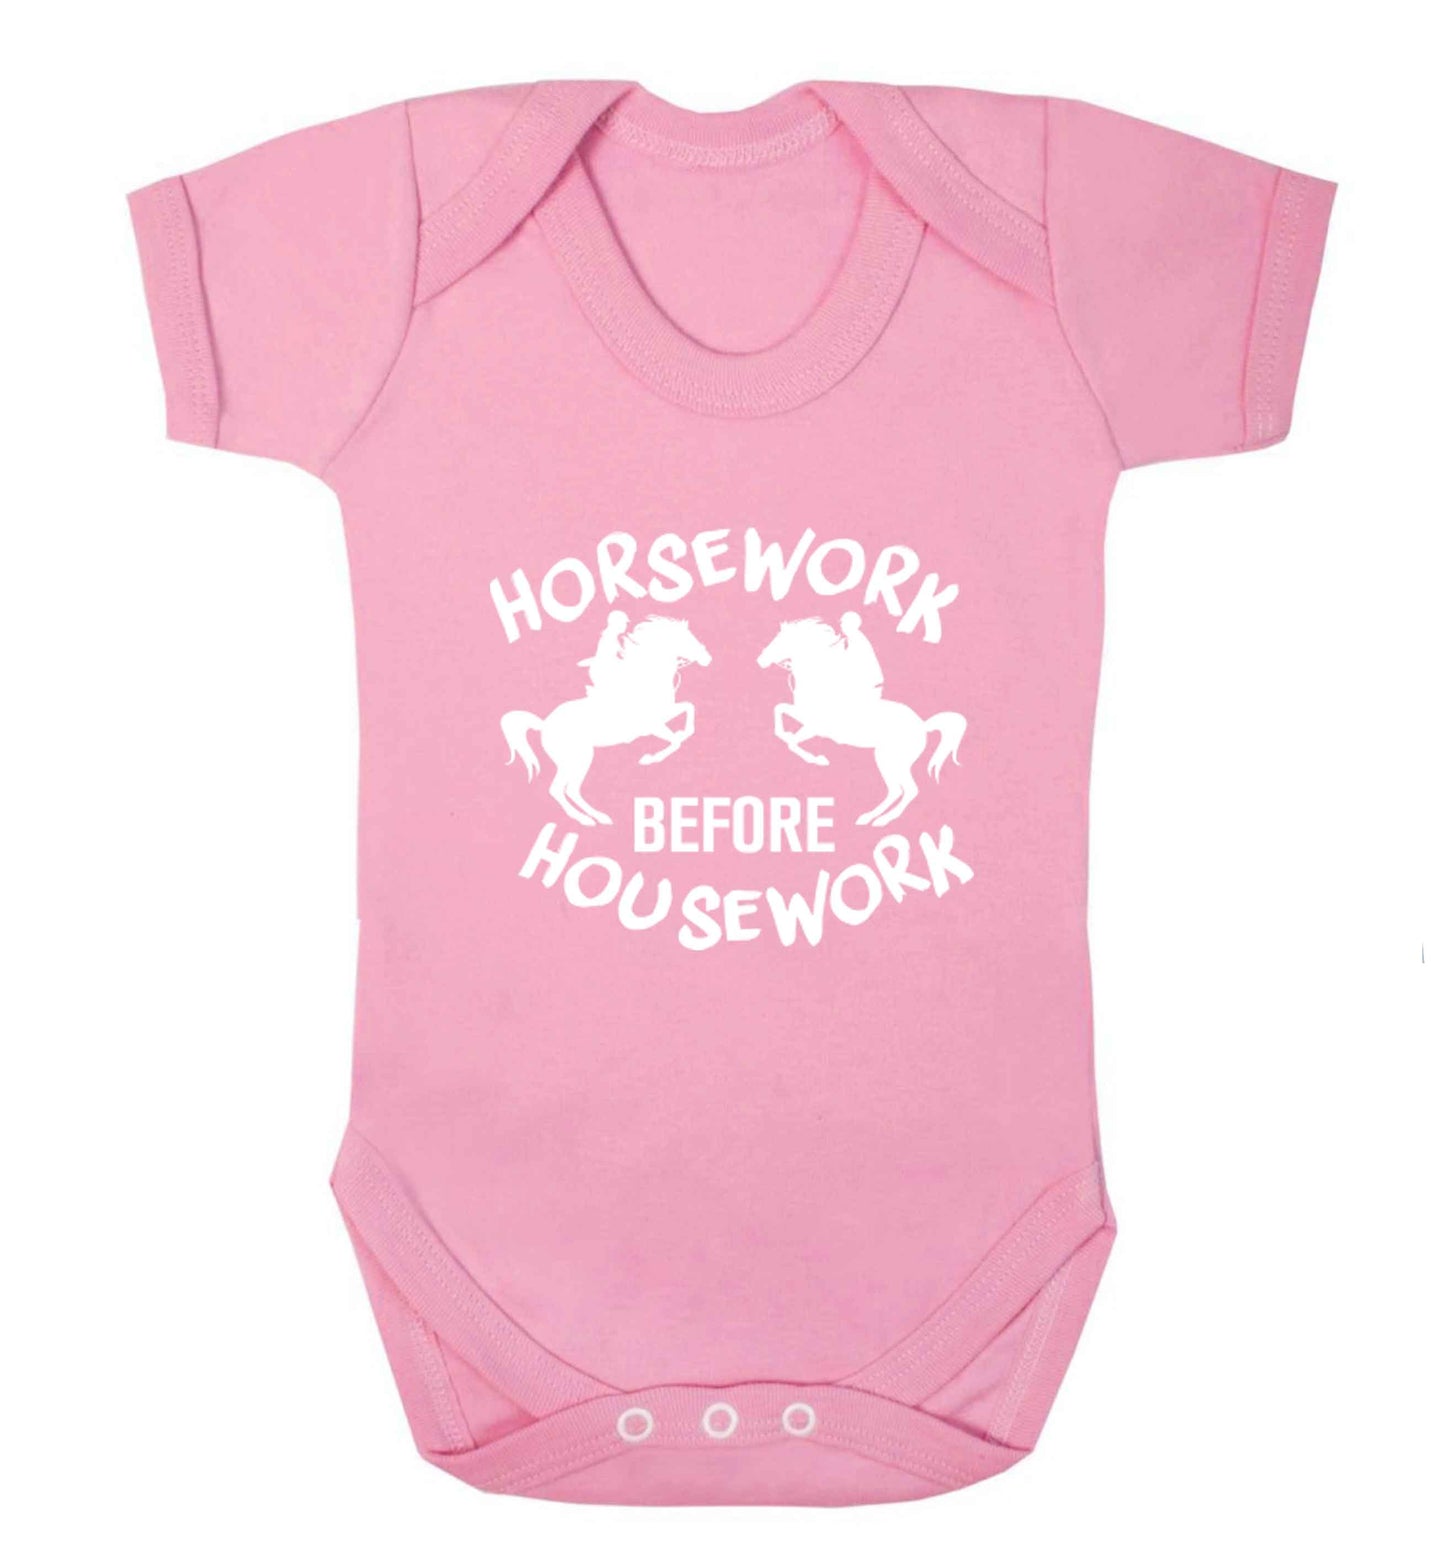 Horsework before housework baby vest pale pink 18-24 months